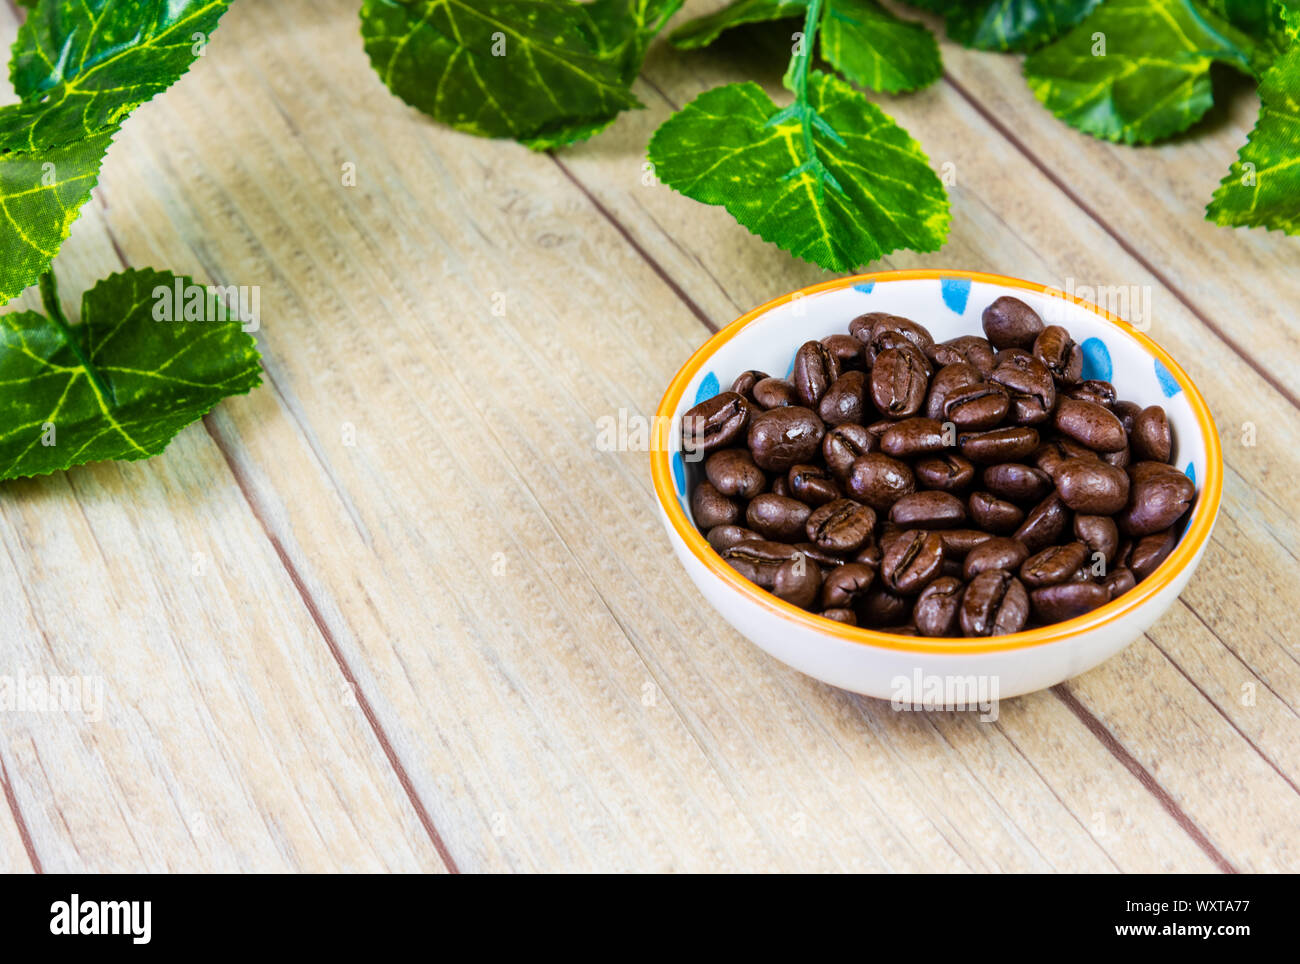 Coffee Beans in a Bowl on a Wooden Background Stock Photo